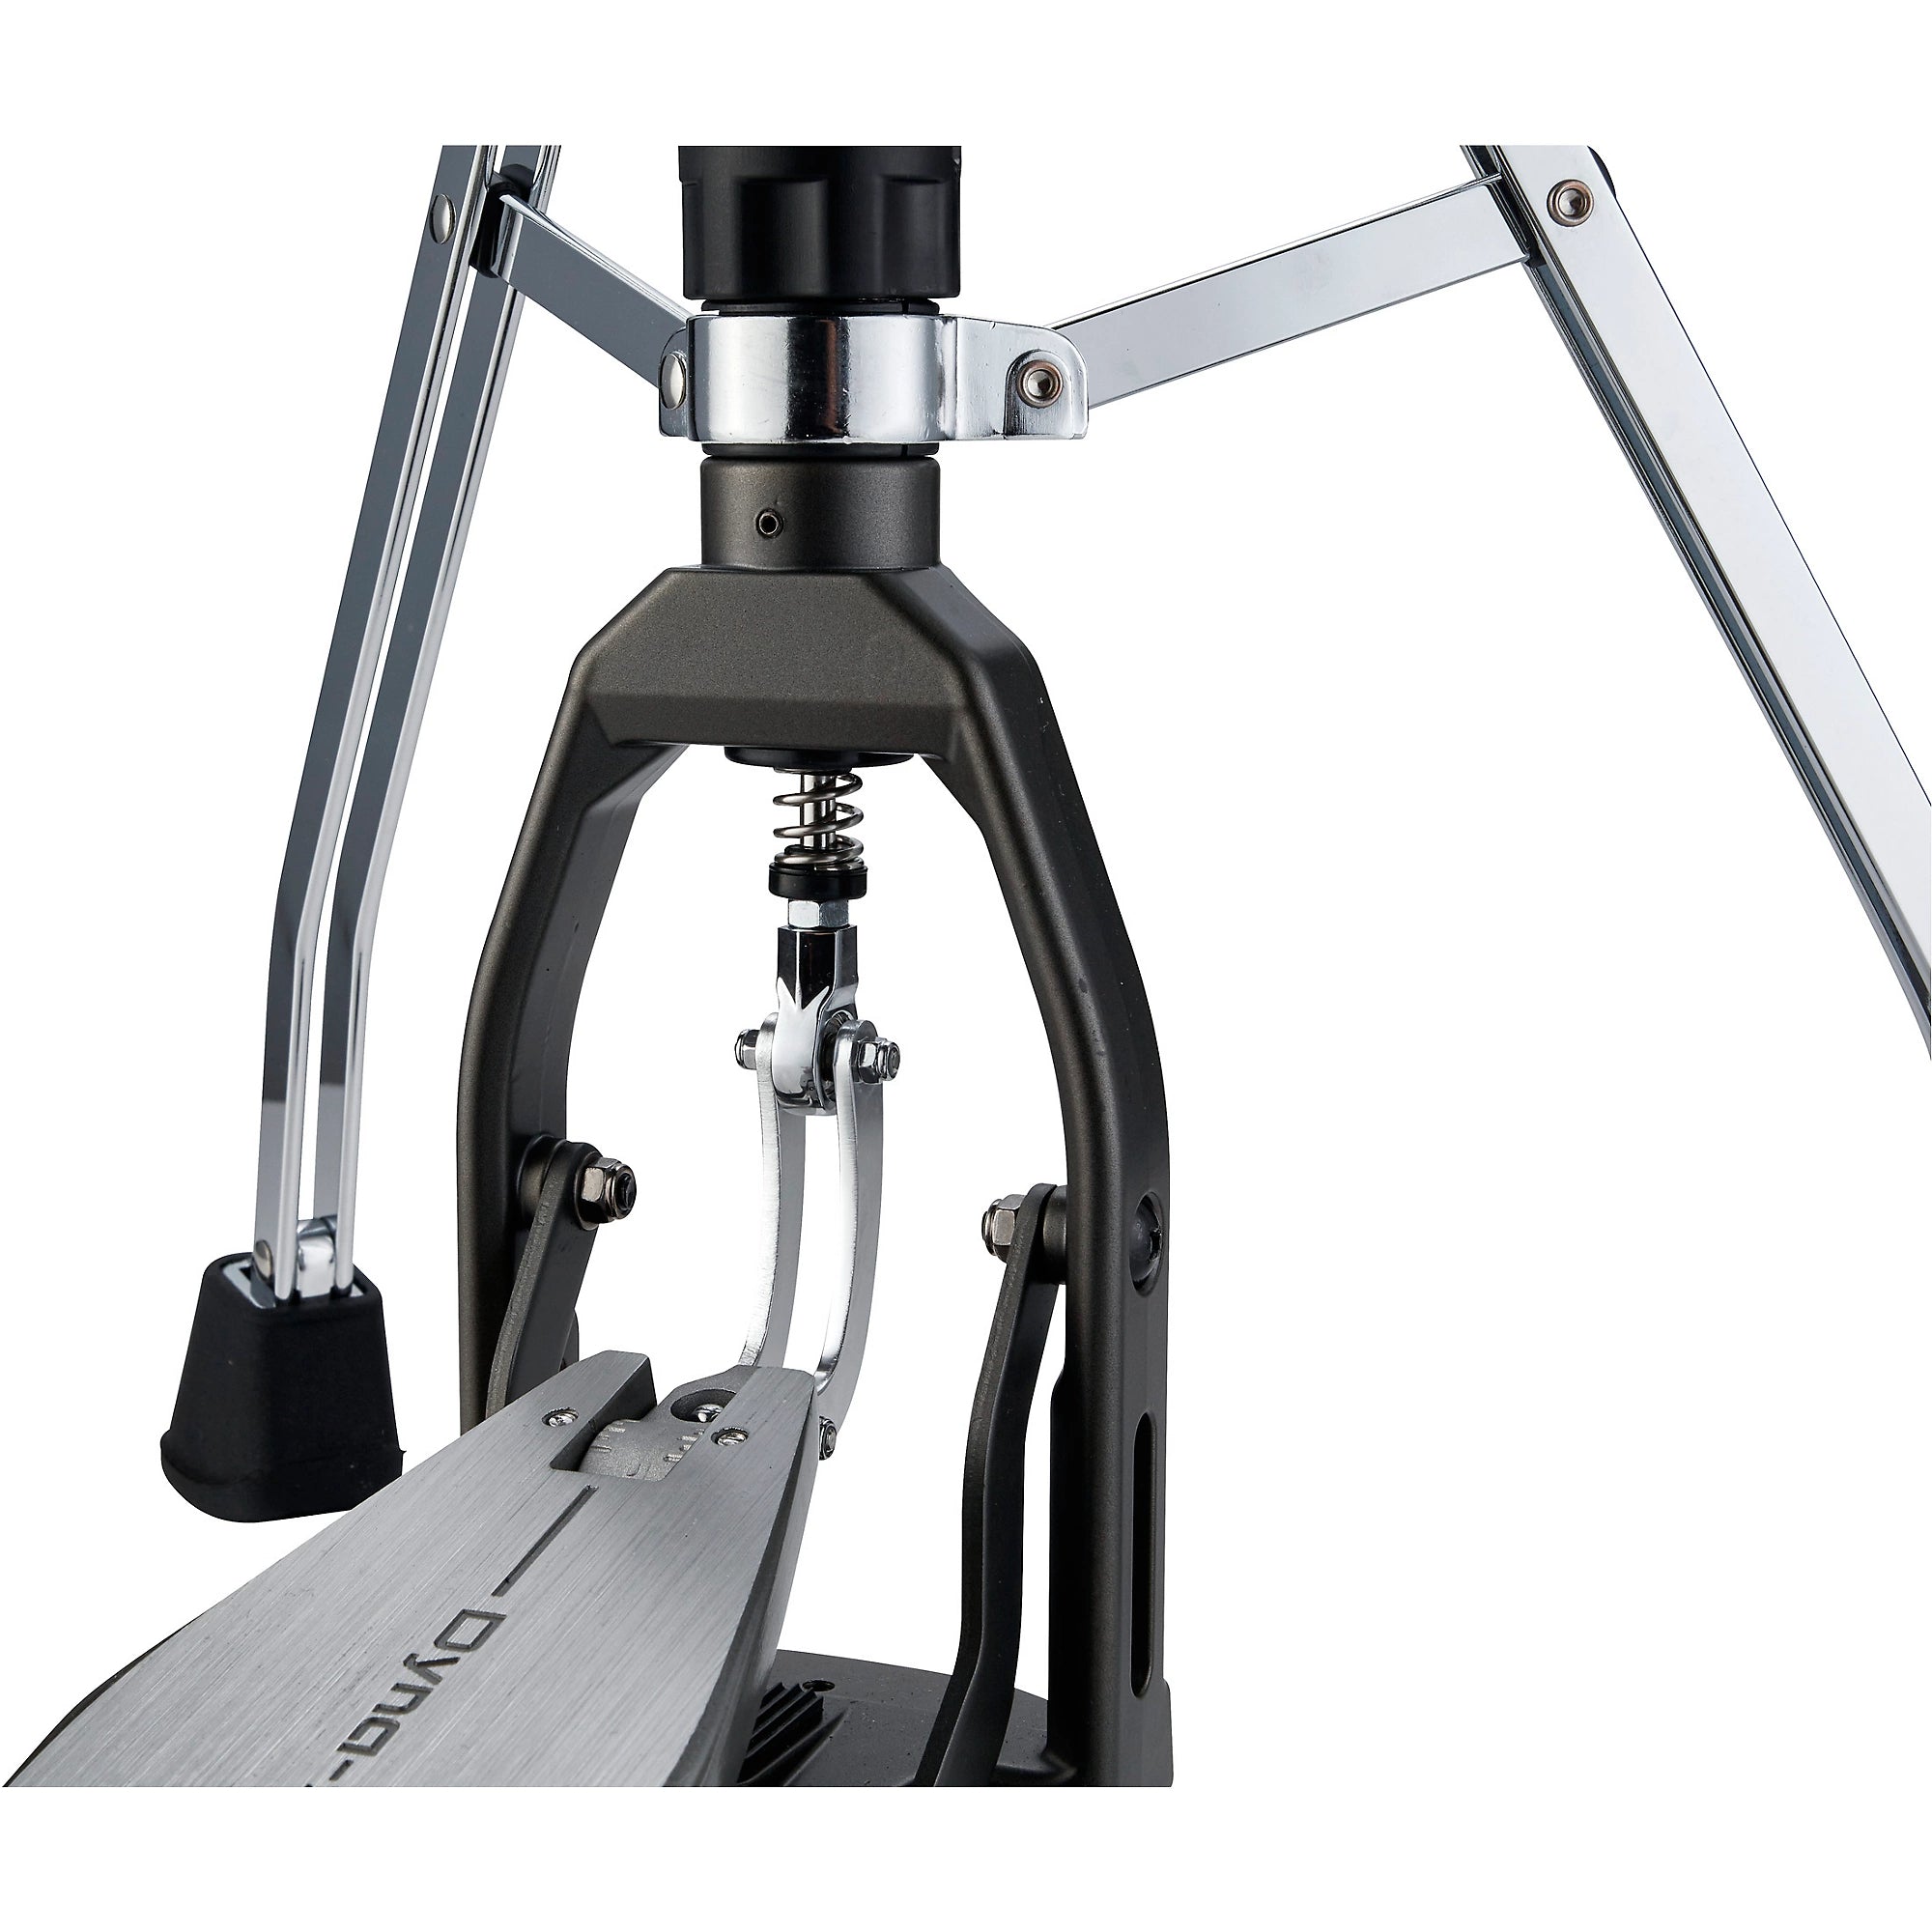 TAMA DYNA-SYNC HI-HAT STAND (IN STORE PURCHASE ONLY)